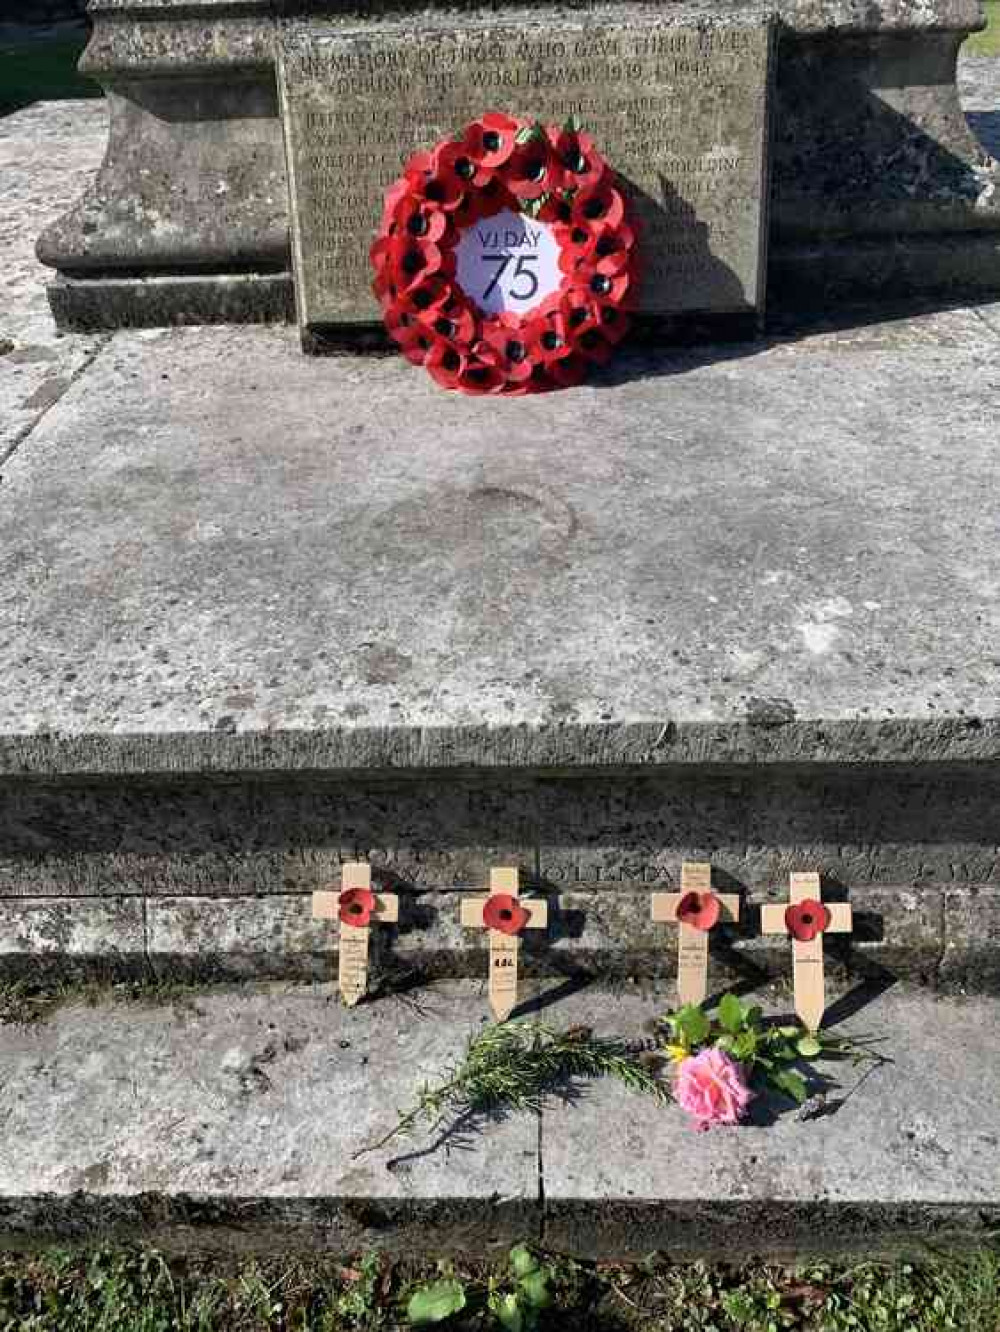 A wreath was laid at the Axminster War Memorial by Valerie Warner, widow of the late David Warner who was chairman of the Axminster branch of the Royal British Legionn